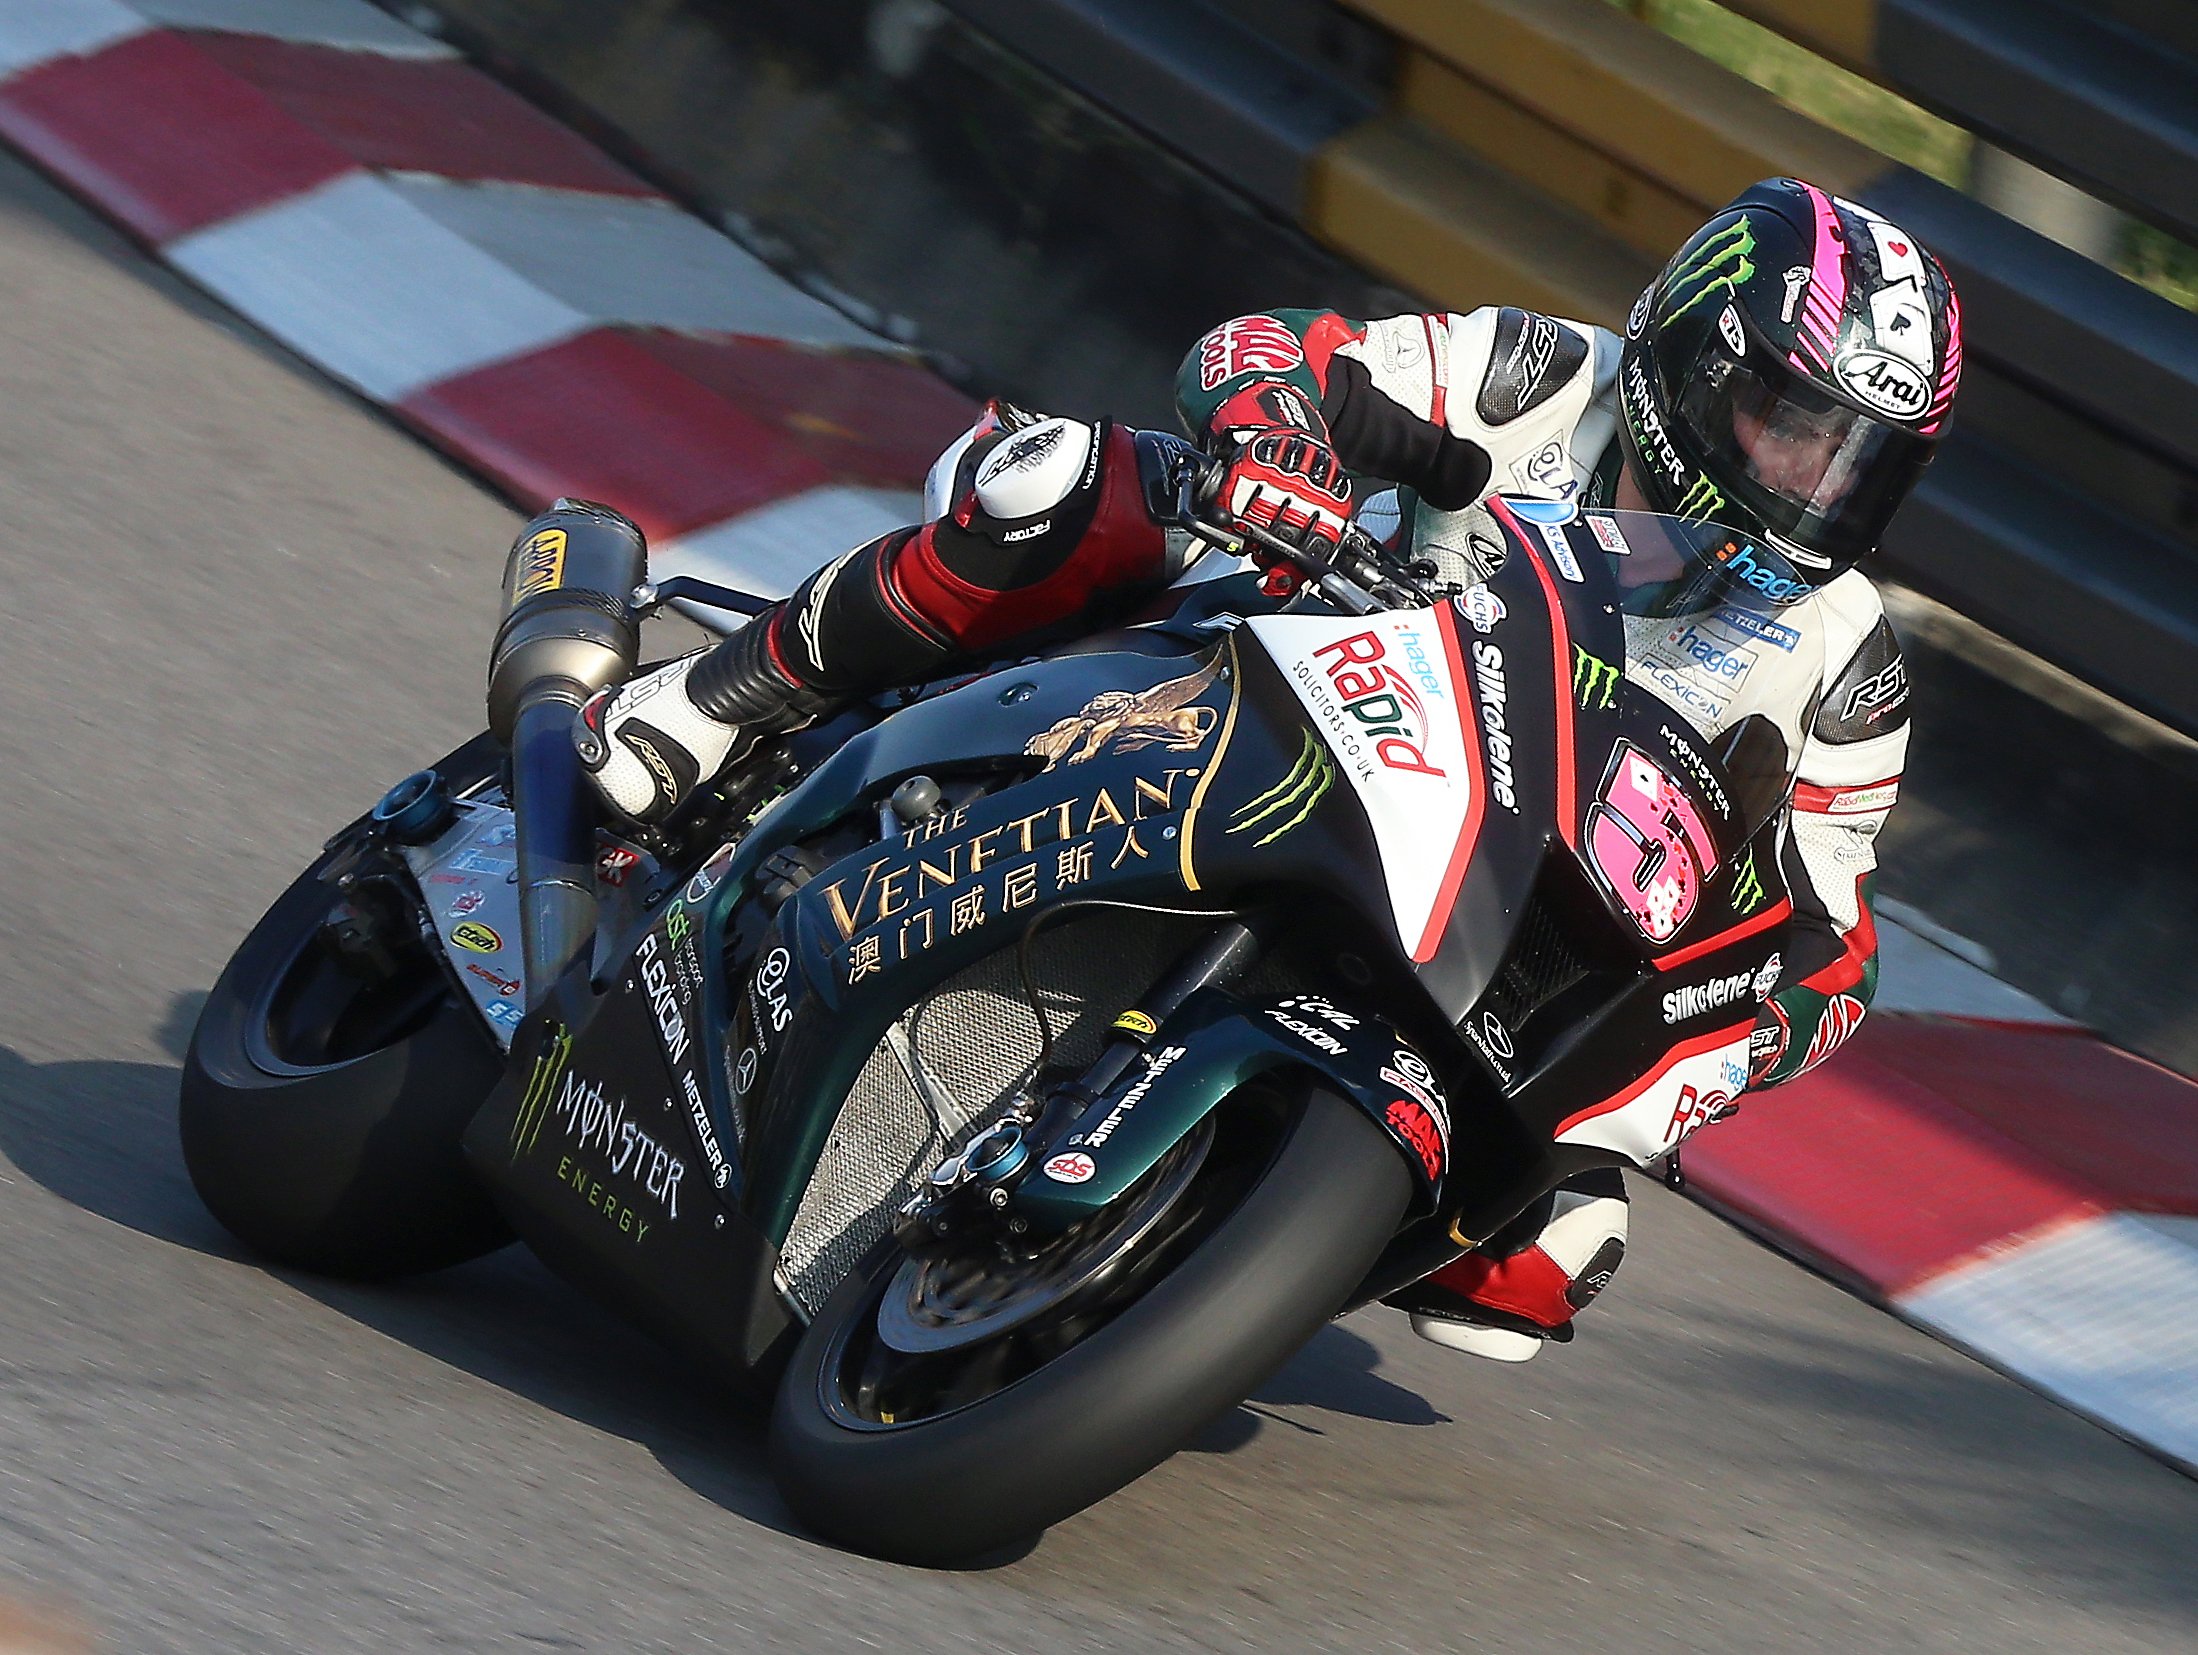 Scotland’s Stuart Easton is aiming for a fifth Macau Motorcycle Grand Prix title this month. Photos: Nora Tam